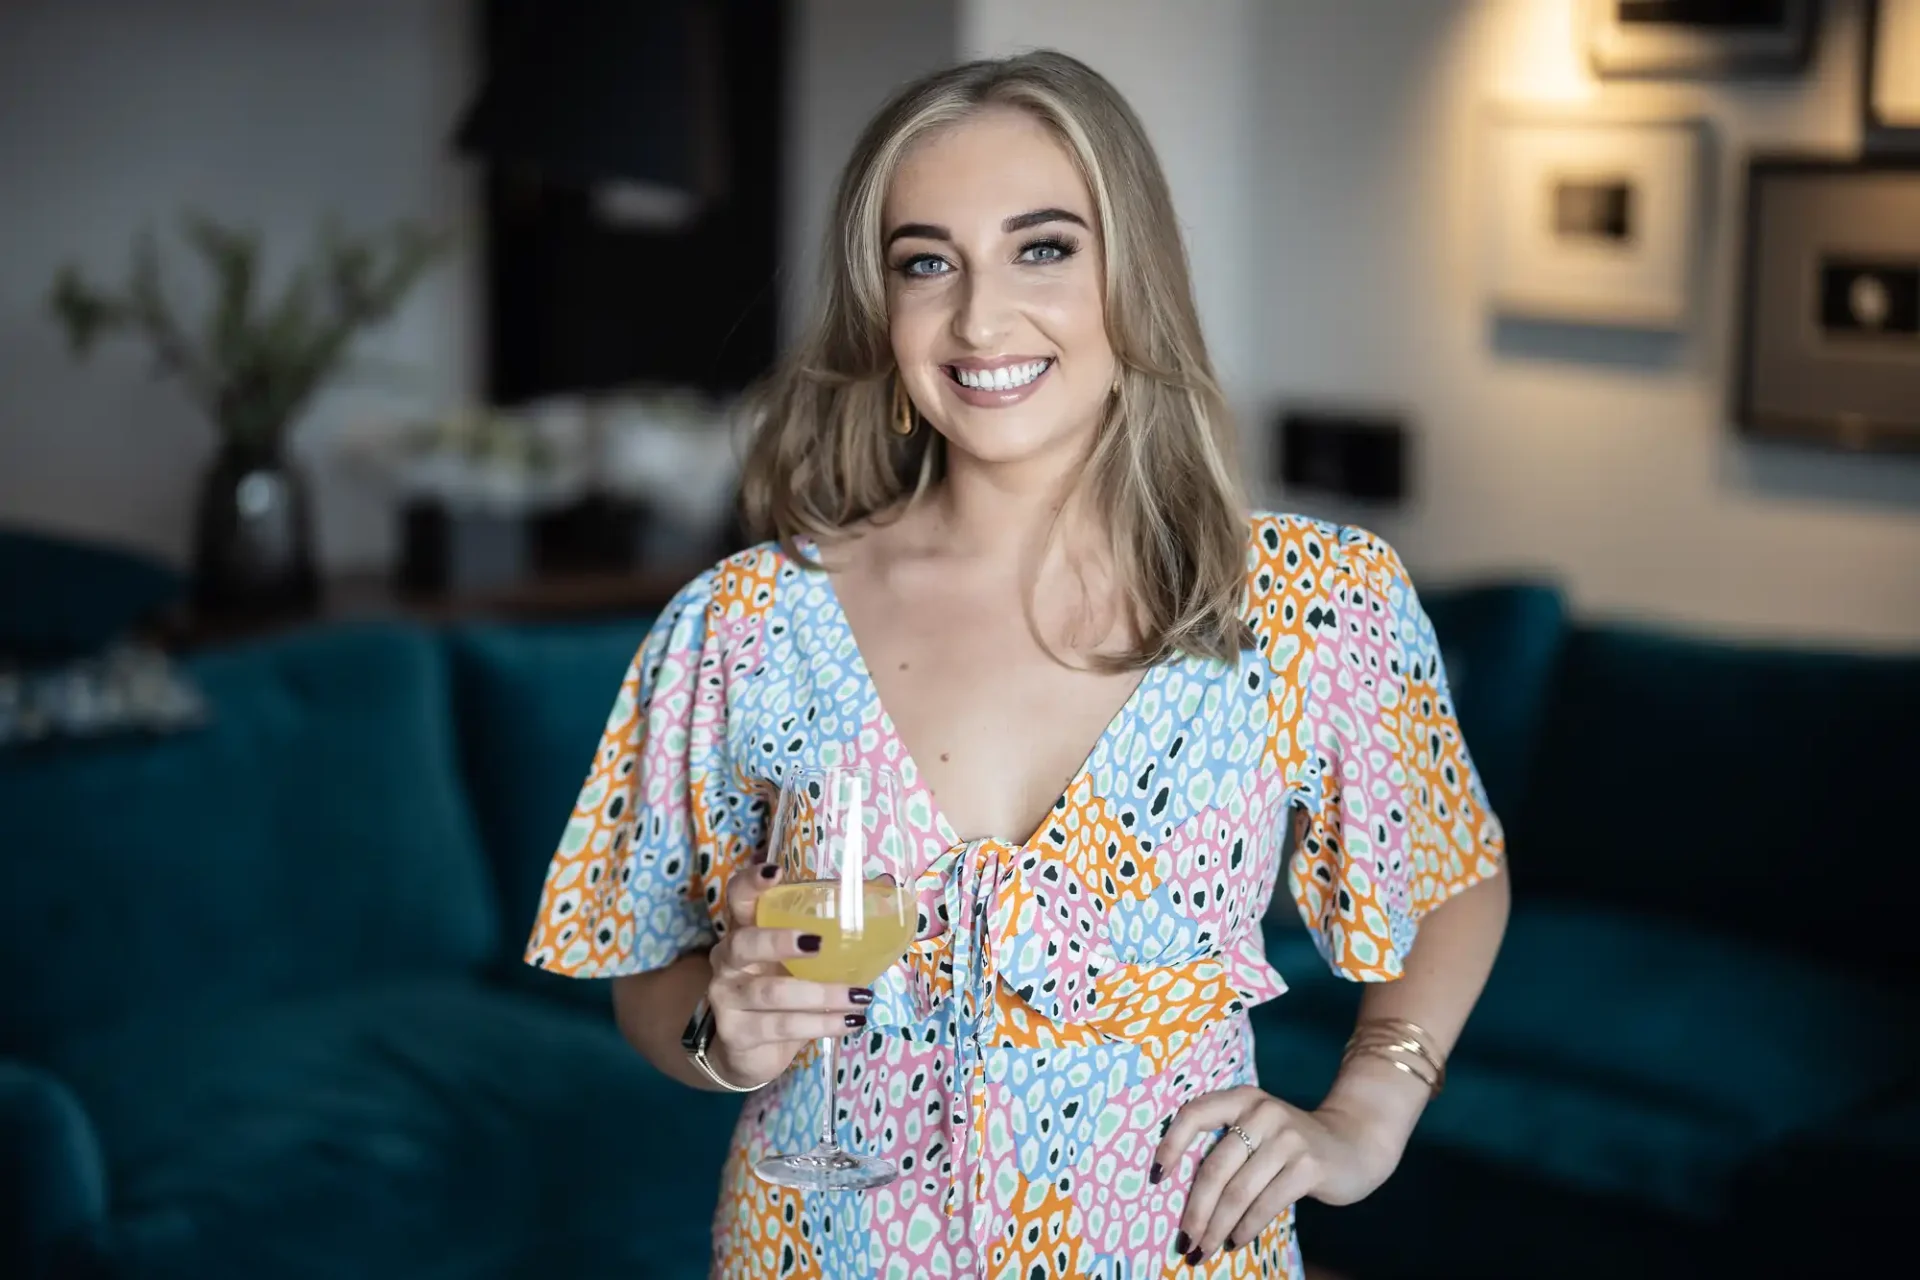 A smiling woman in a colorful dress holding a glass of wine, standing in a stylishly decorated room with blue sofas.